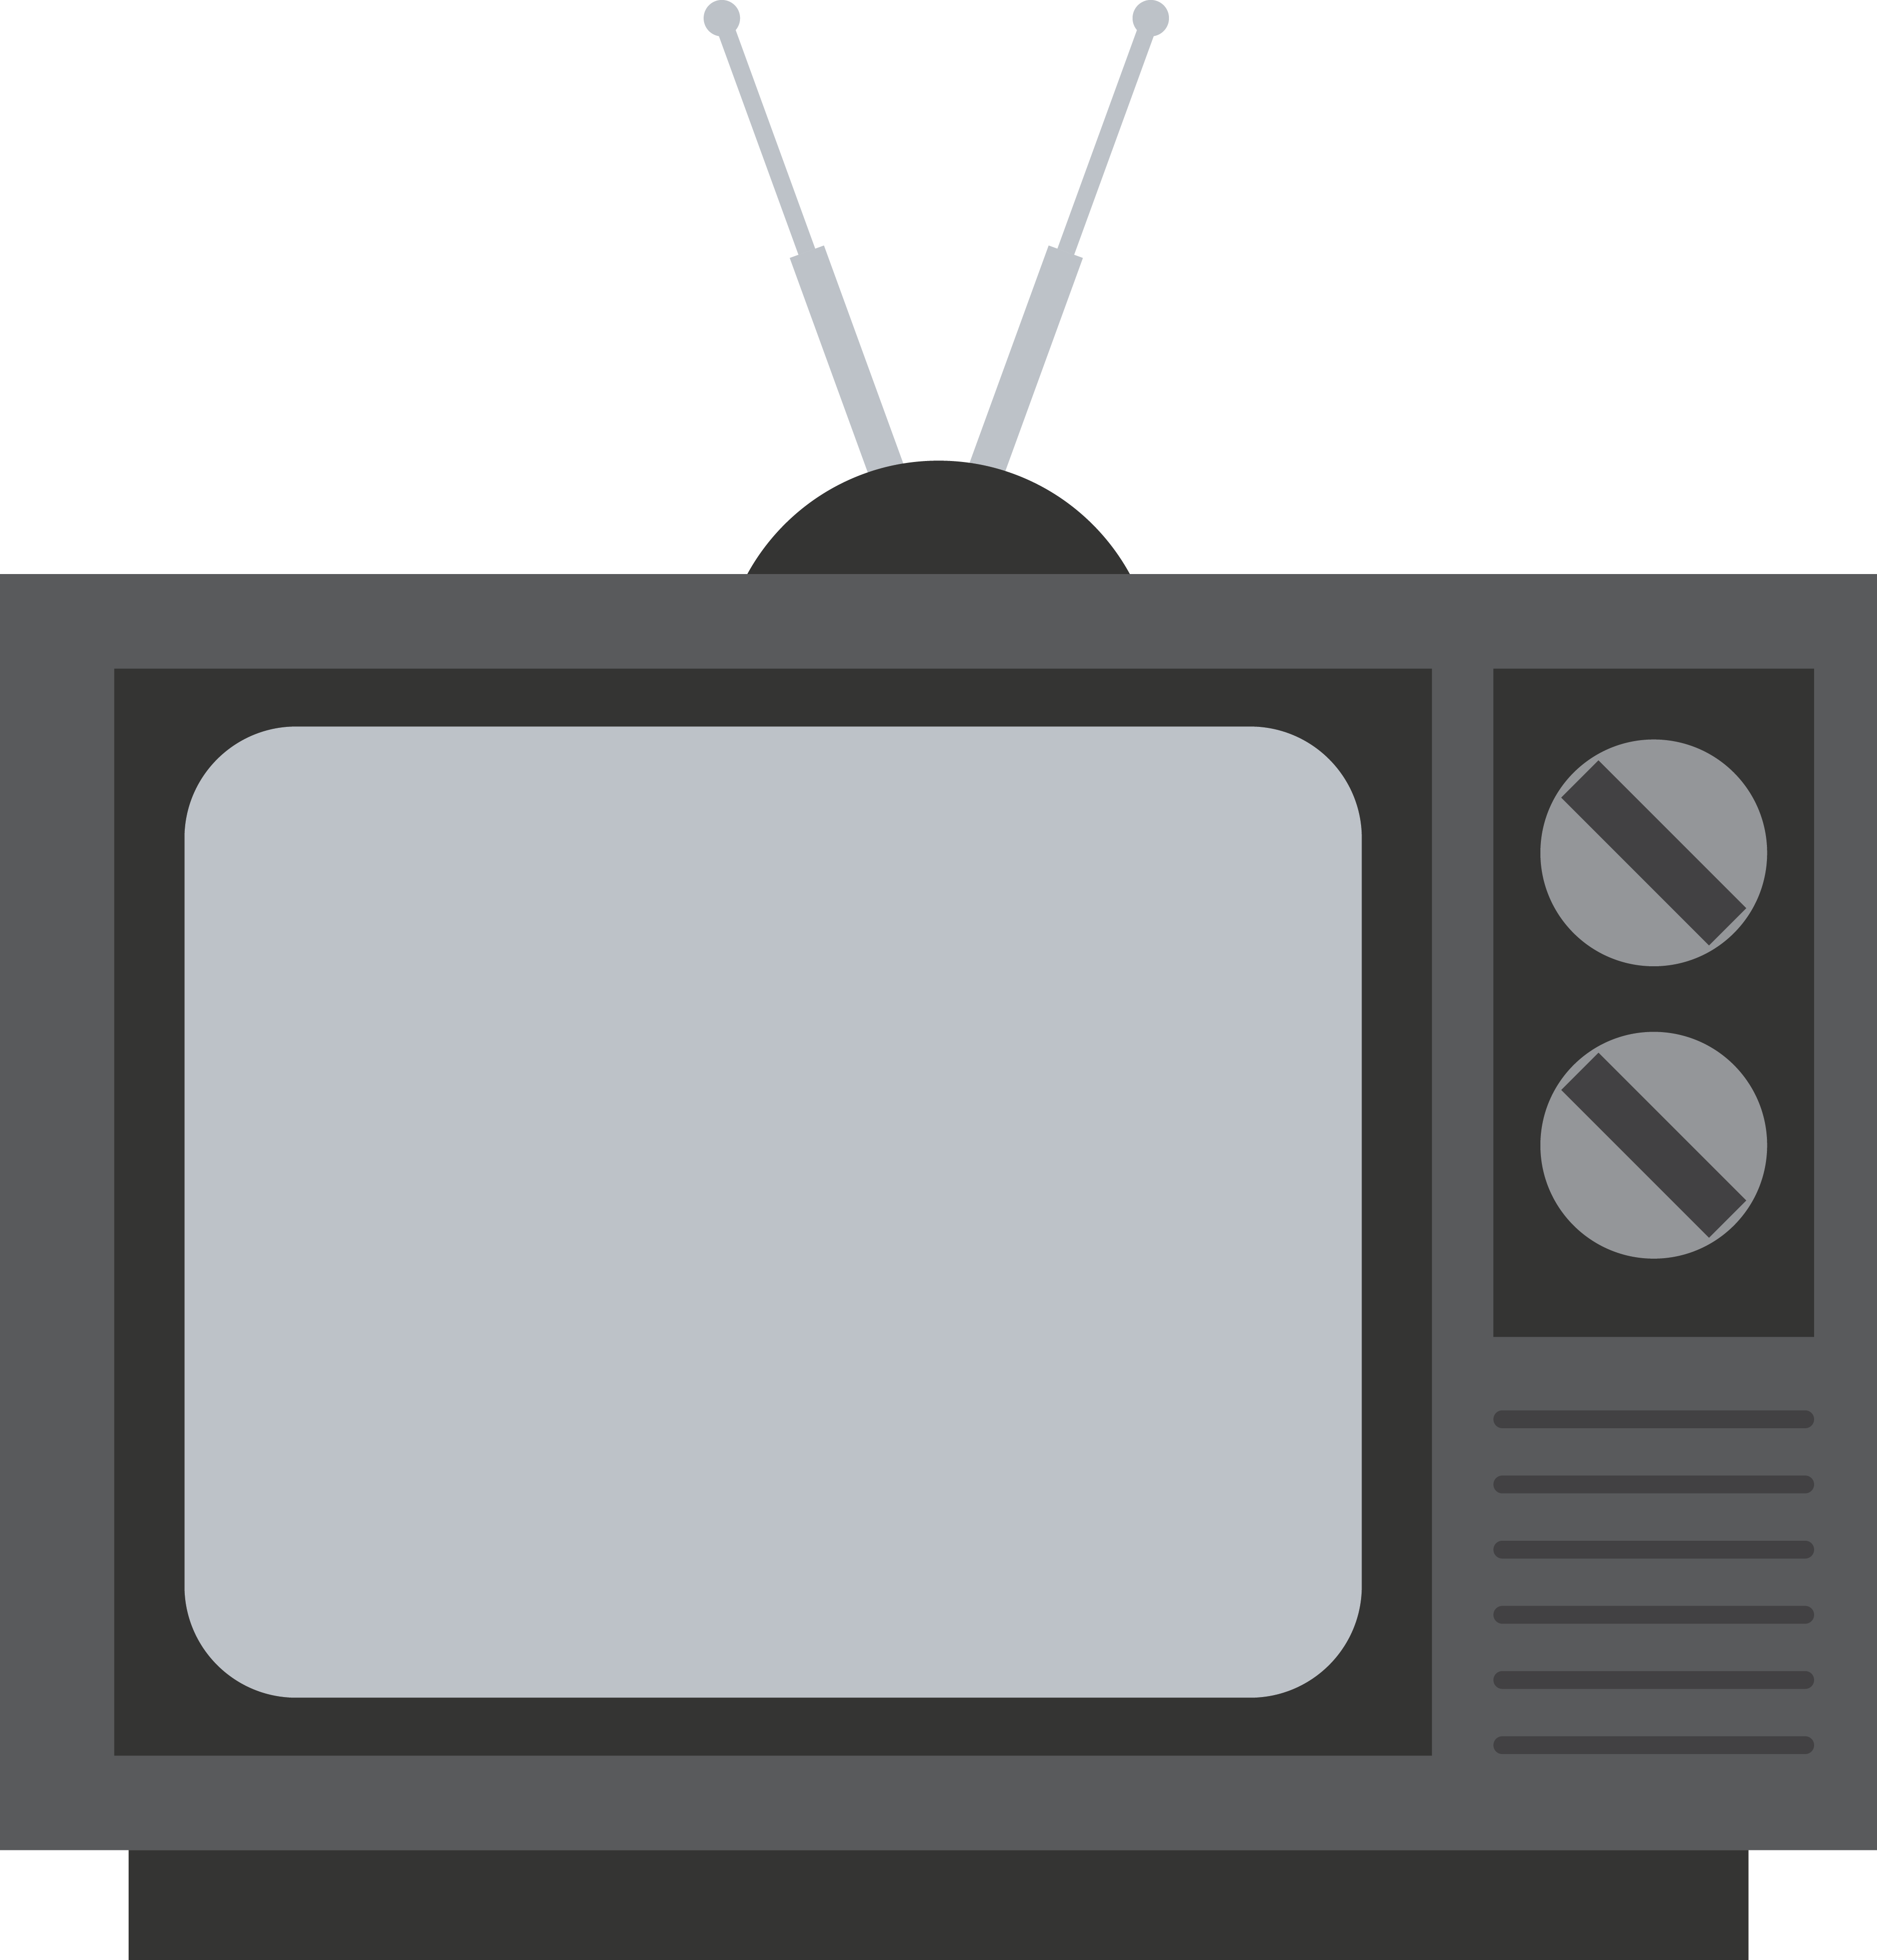 Television,Rectangle,Television set,Font,Technology,Screen